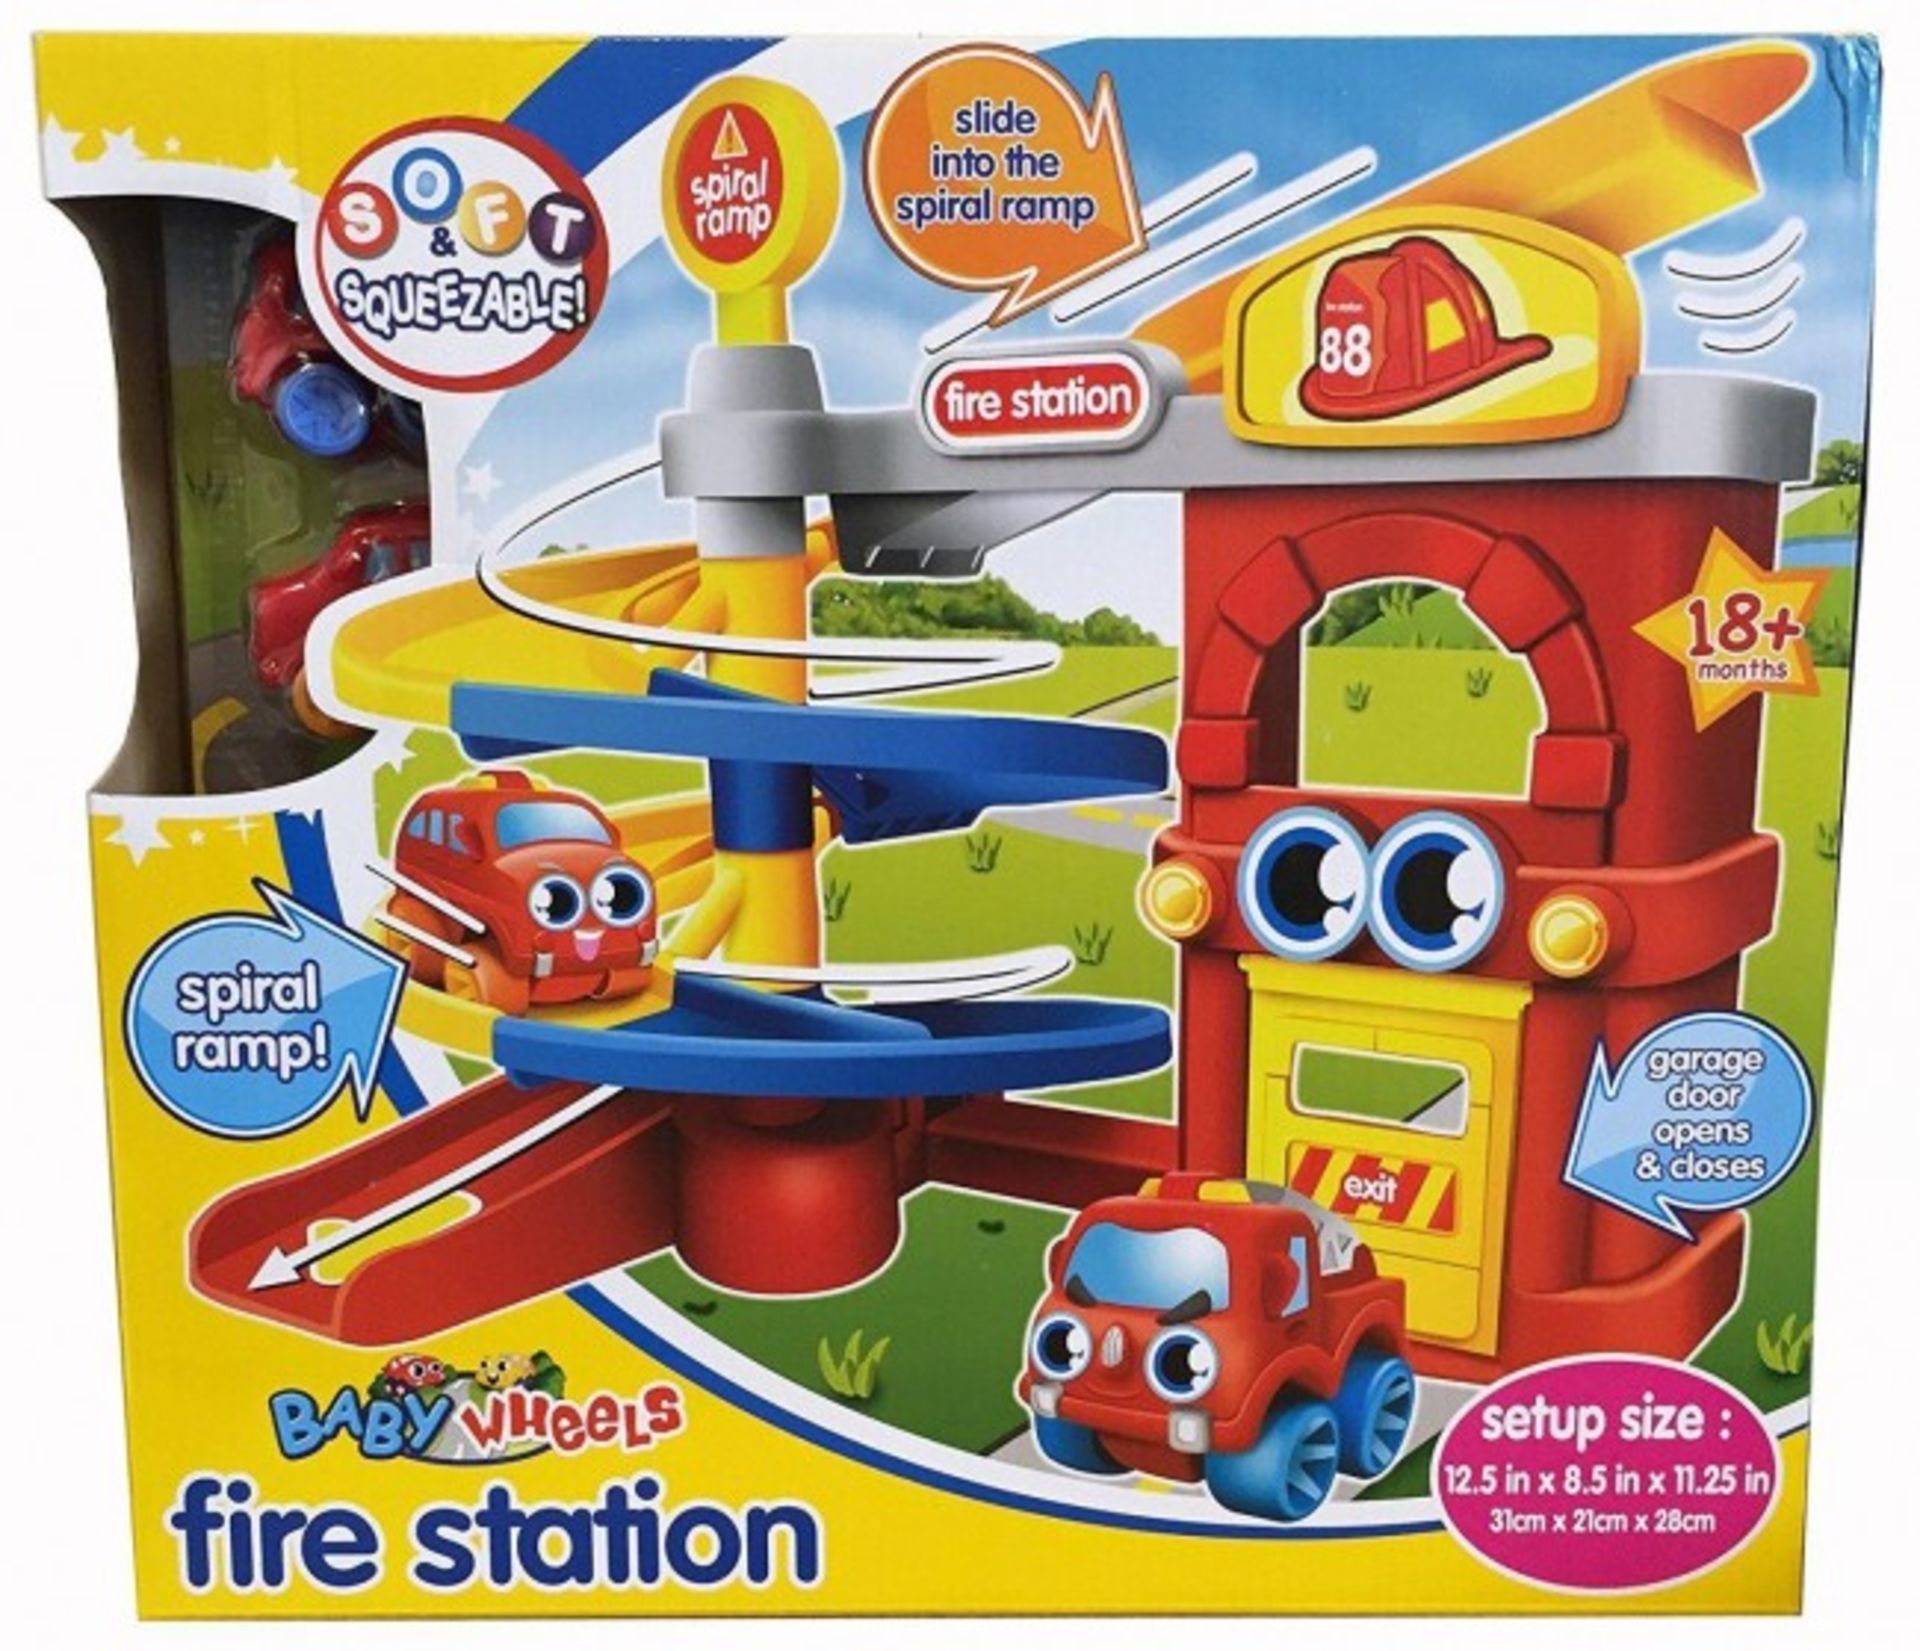 V Brand New Baby Wheels Fire Station Play Set 8mths + ISP £12.99 (My Shop)